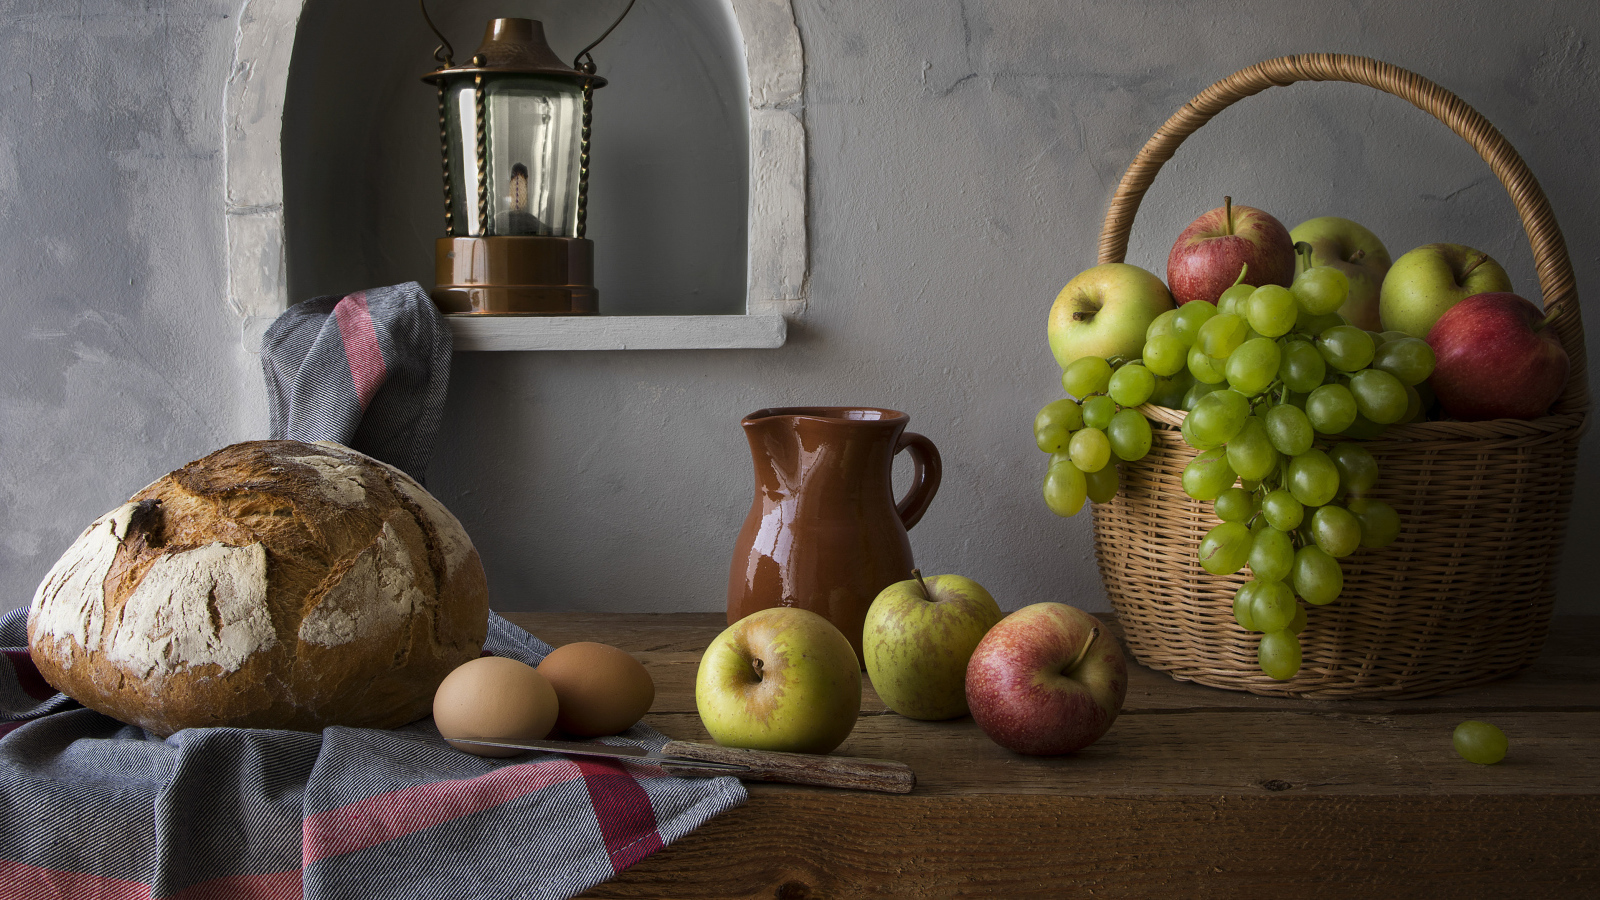 Basket with apples and grapes on a table with bread and eggs